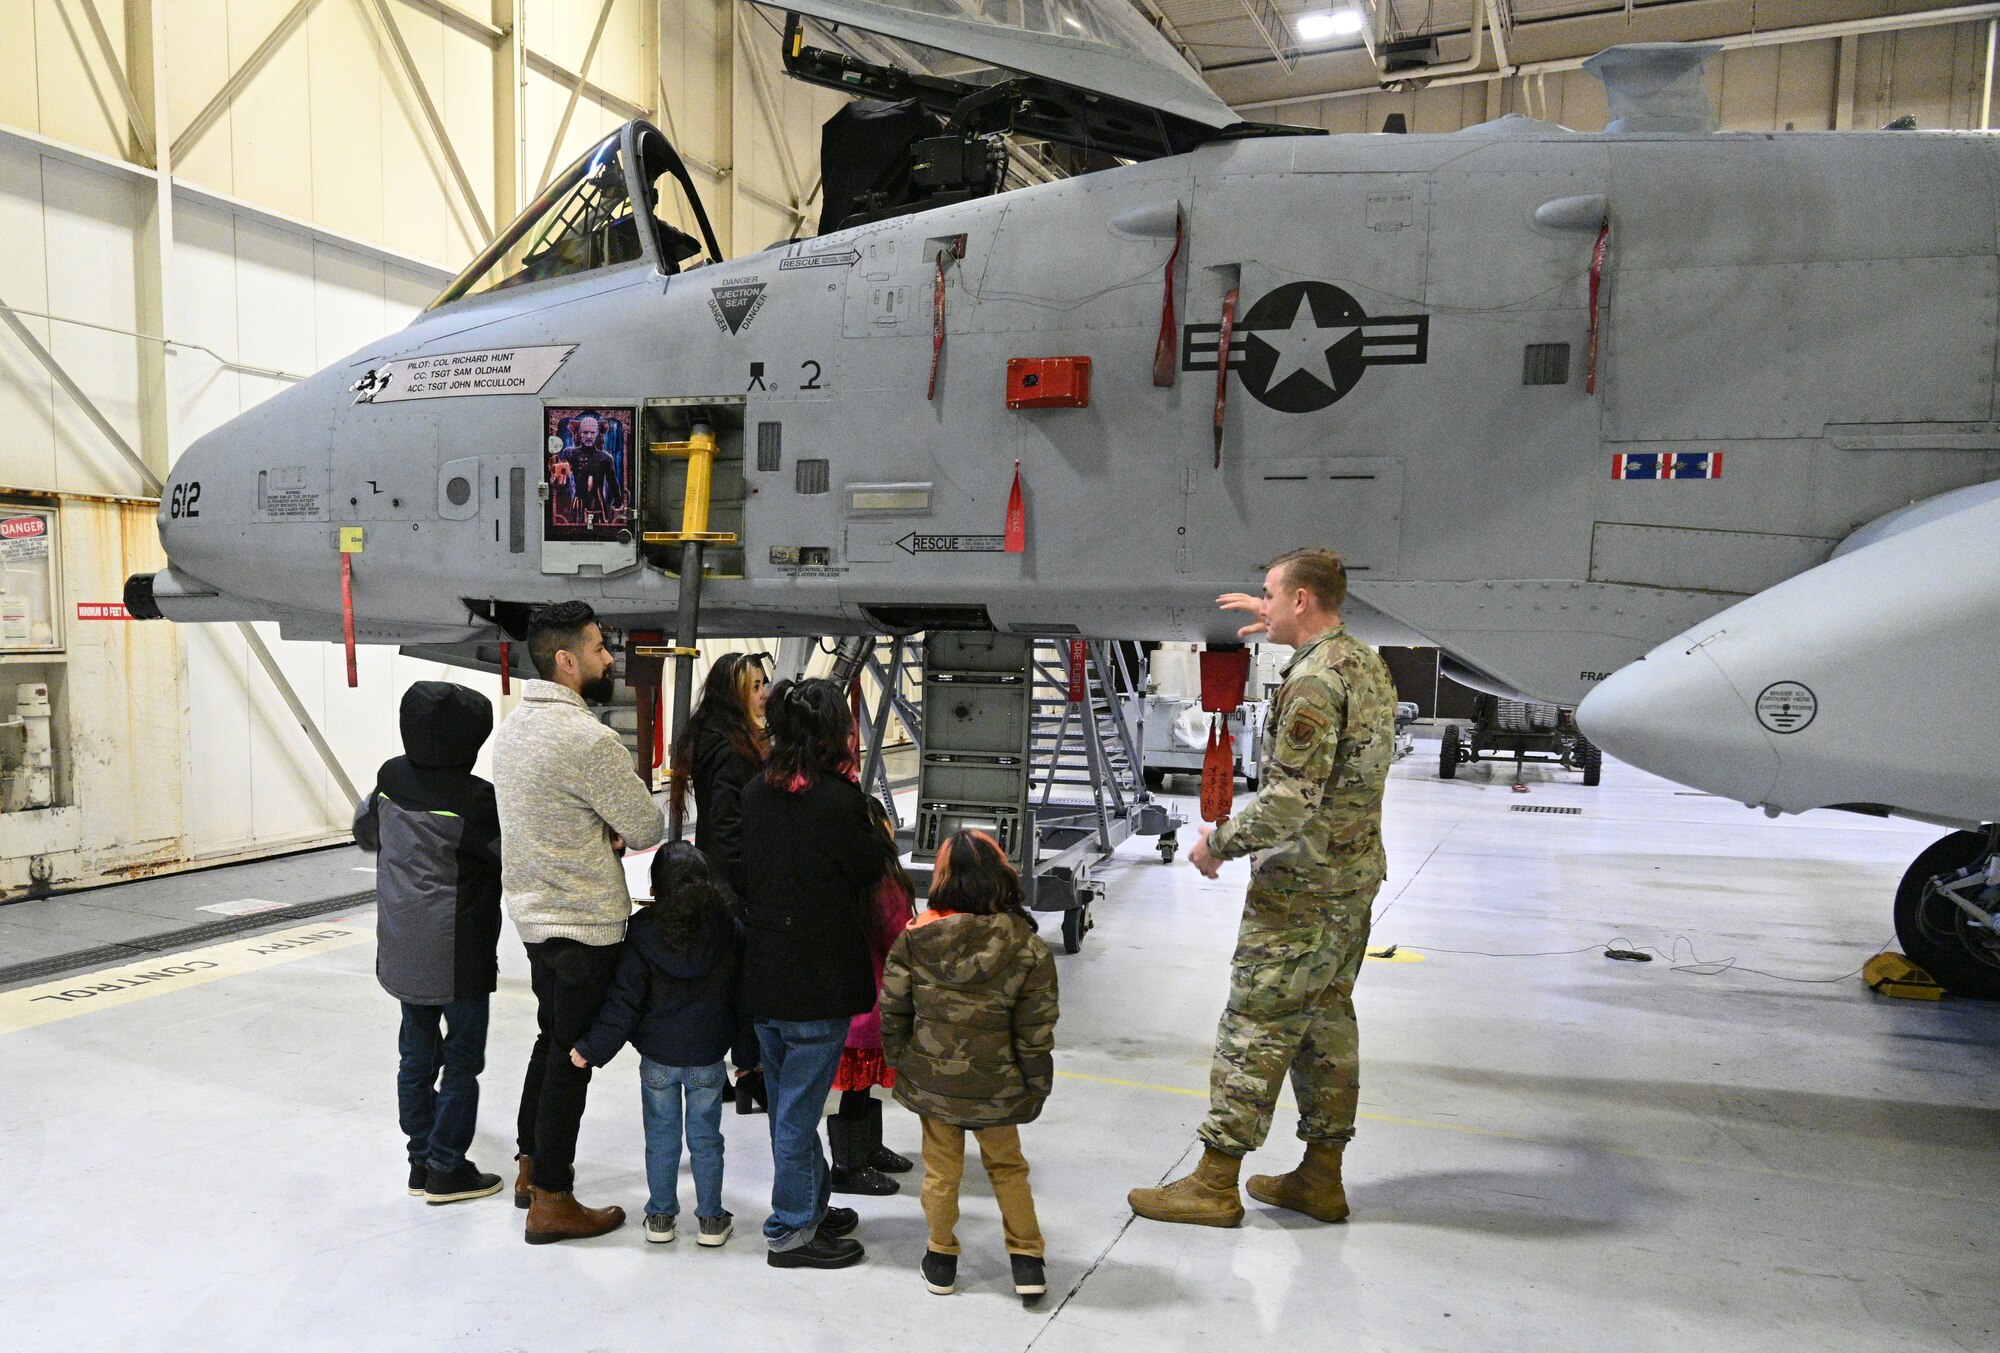 U.S. Air Force Tech. Sgt. Eric Hollman, 175th Wing recruiter, gives a tour of the A-10C Thunderbolt II aircraft to the Chavez family at Warfield Air National Guard Base at Martin State Airport, Middle River, Md., on December 20, 2022.